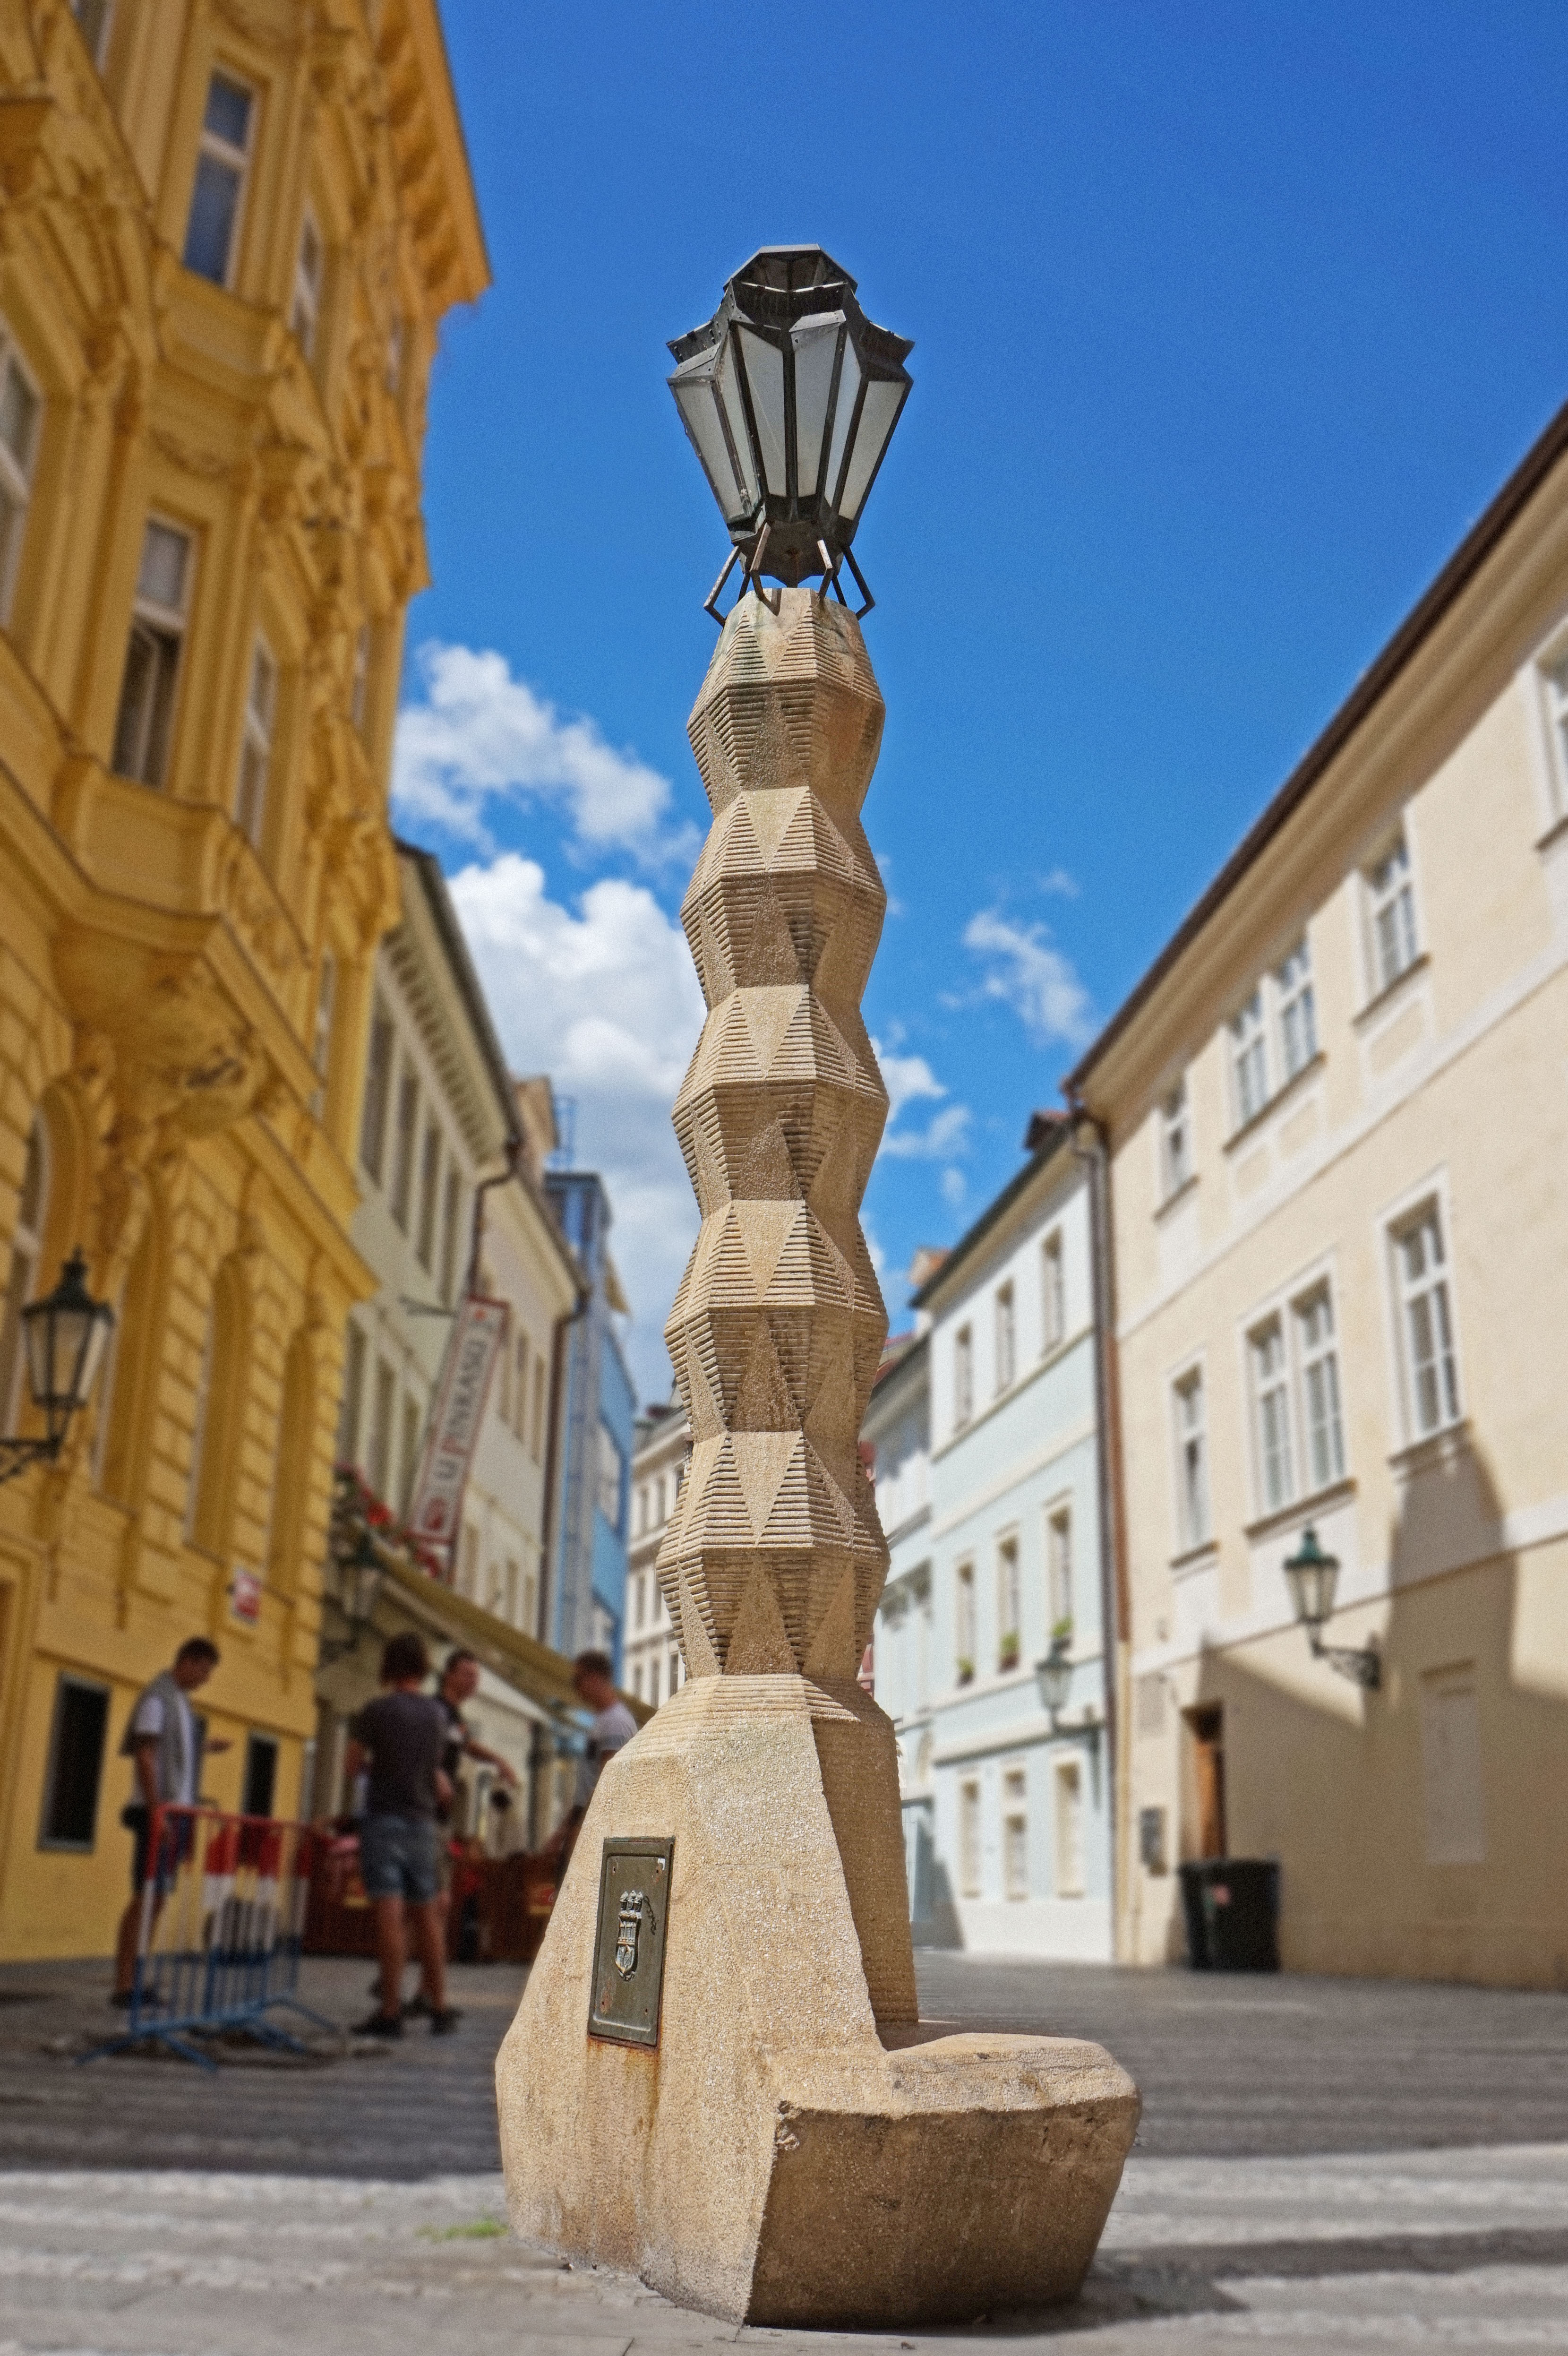 The only cubistic lamp in a world - Prague